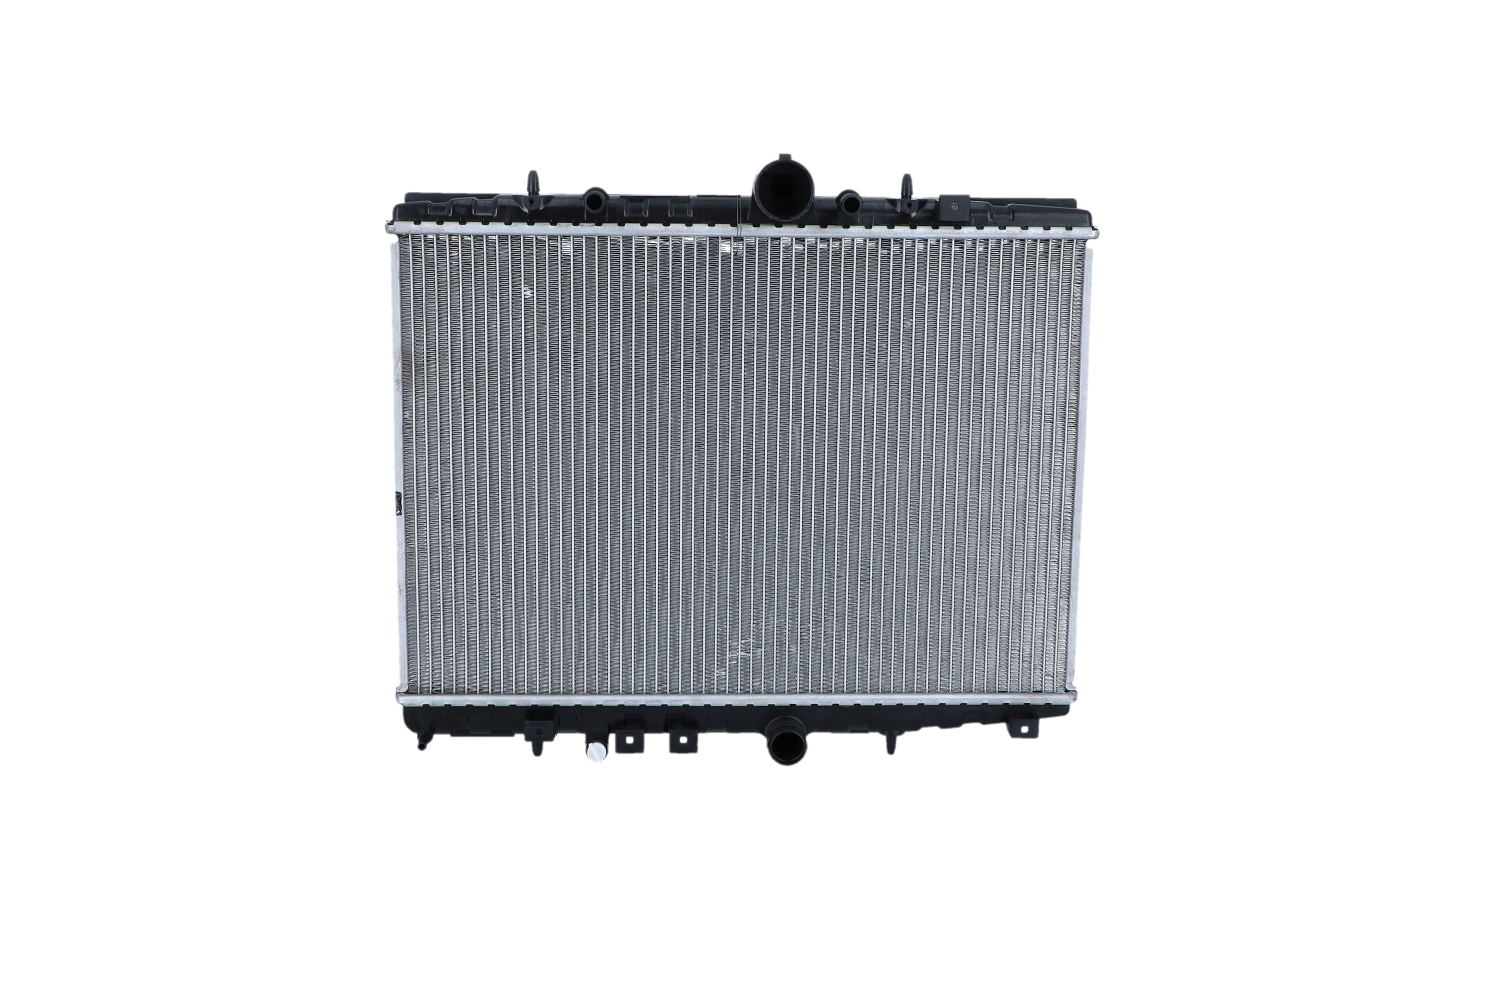 NRF EASY FIT Aluminium, 555 x 380 x 33 mm, with seal ring, Brazed cooling fins Radiator 58341 buy